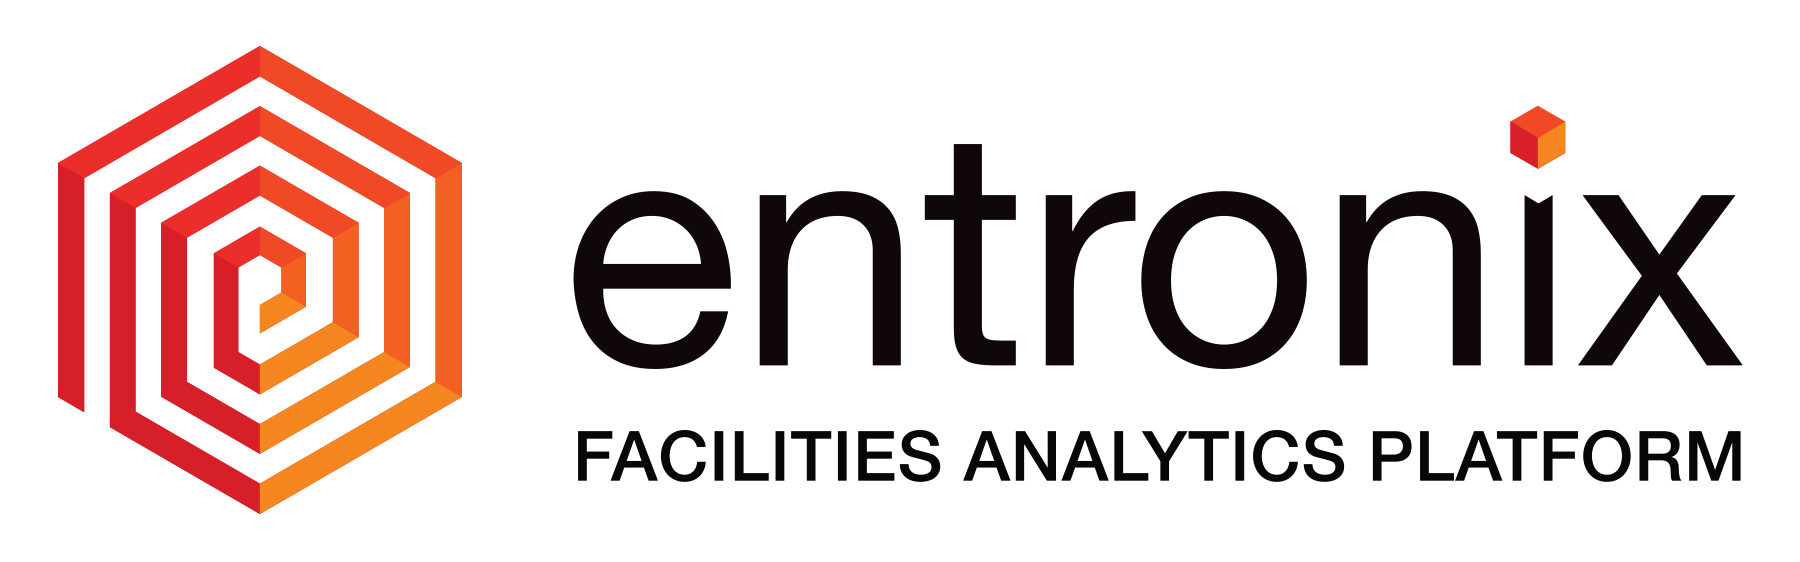 Entronix AI-Based Analytics Platforms for Commercial Facilities